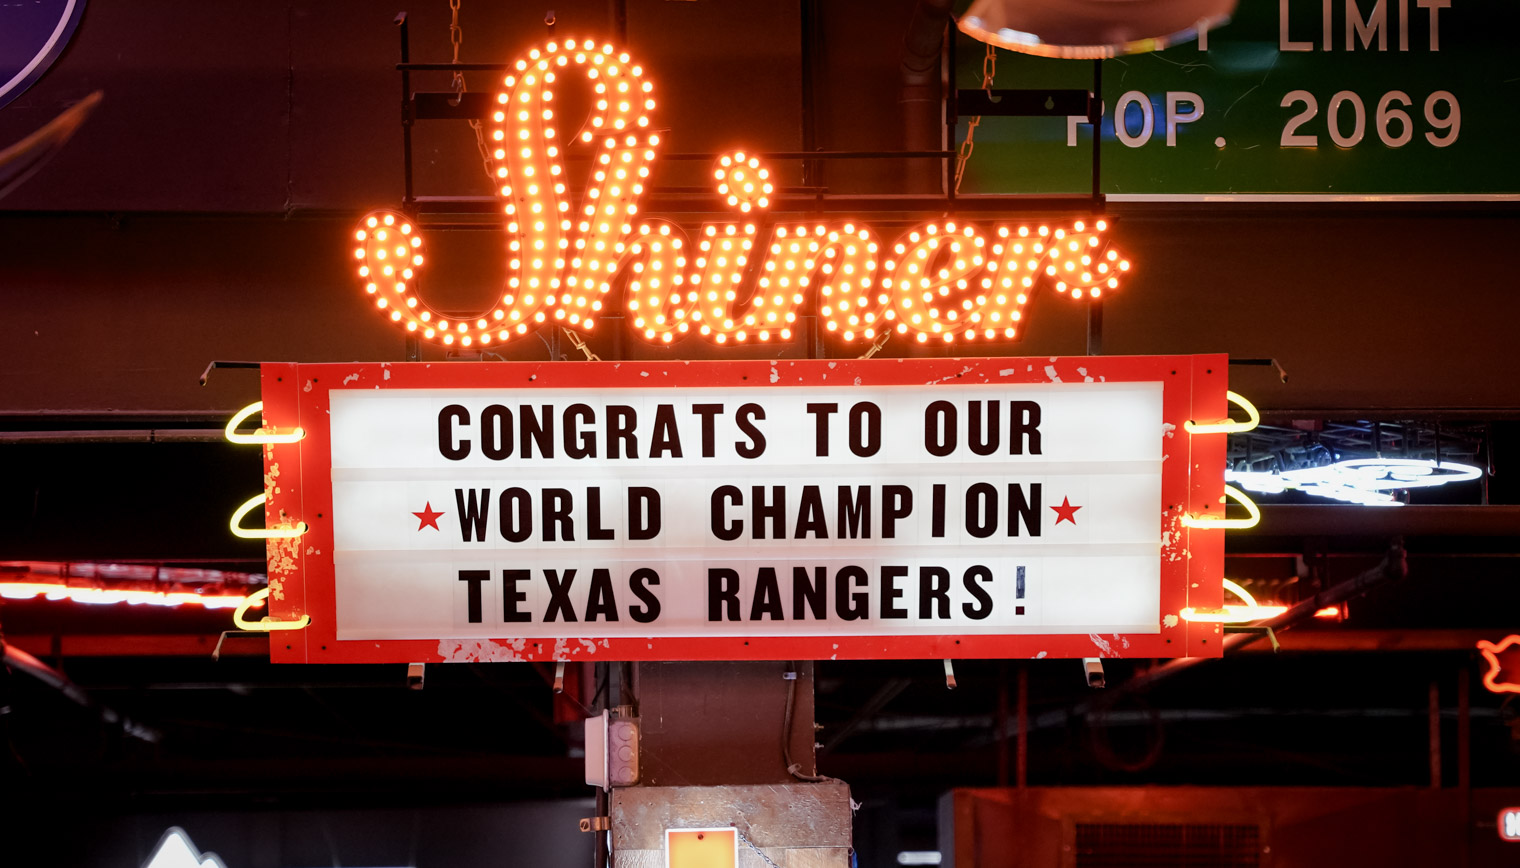 A marquee sign that says "Congrats to our world champion Texas rangers"